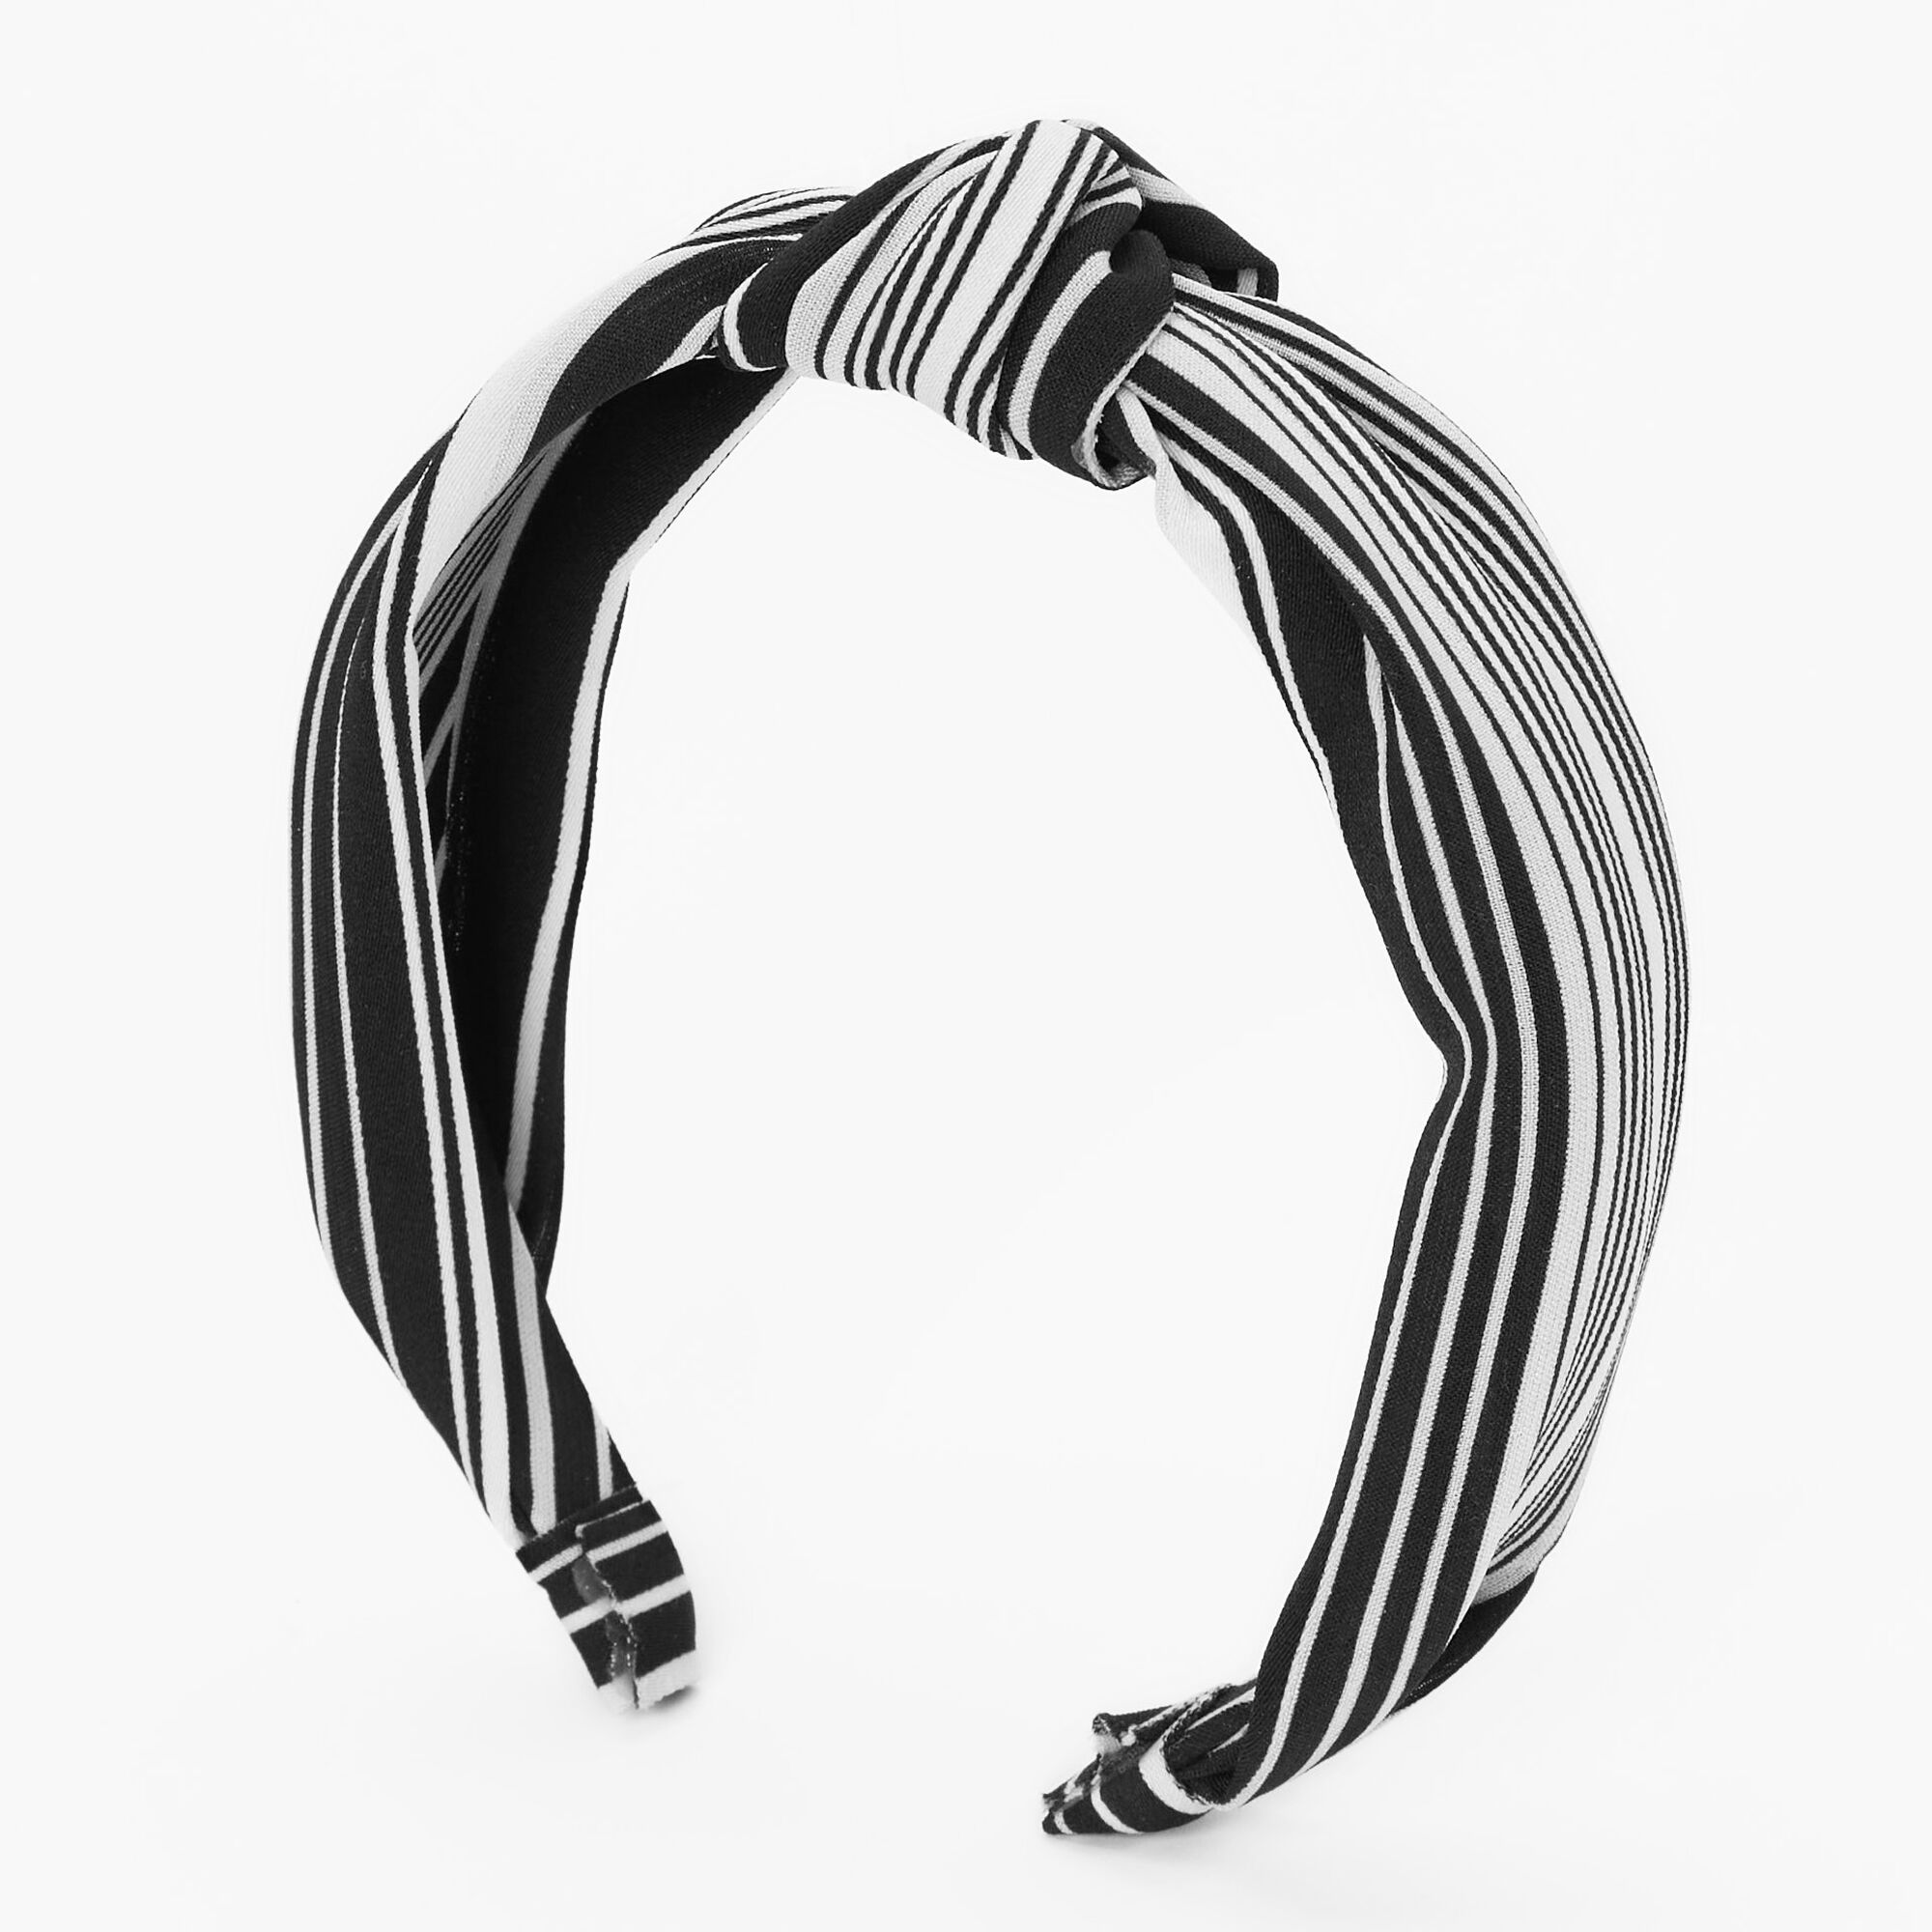 View Claires Black Striped Knotted Headband White information